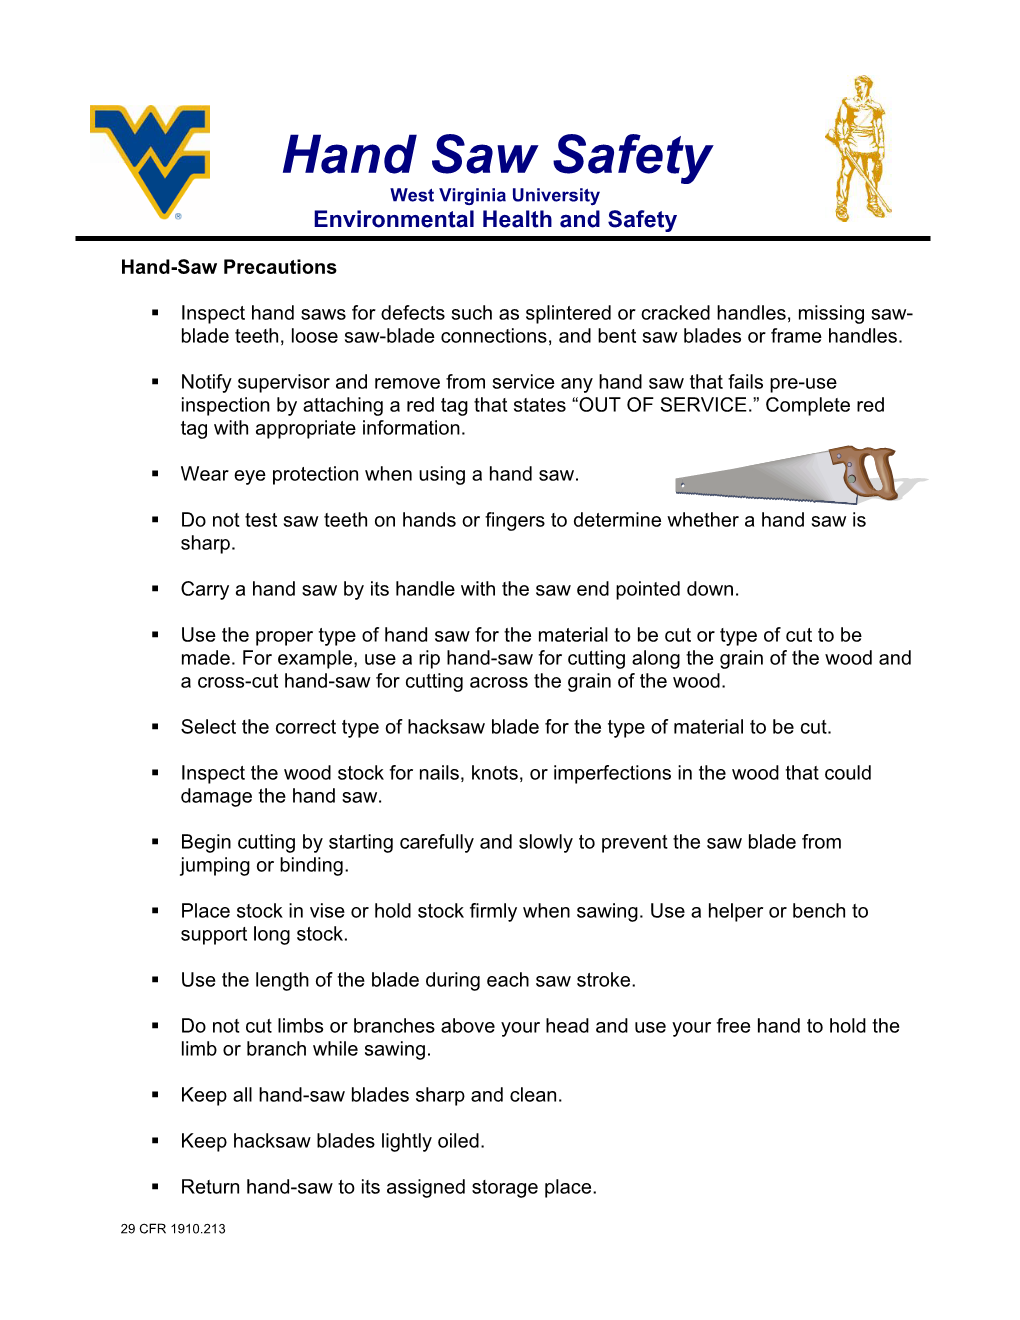 Hand-Saw Safety